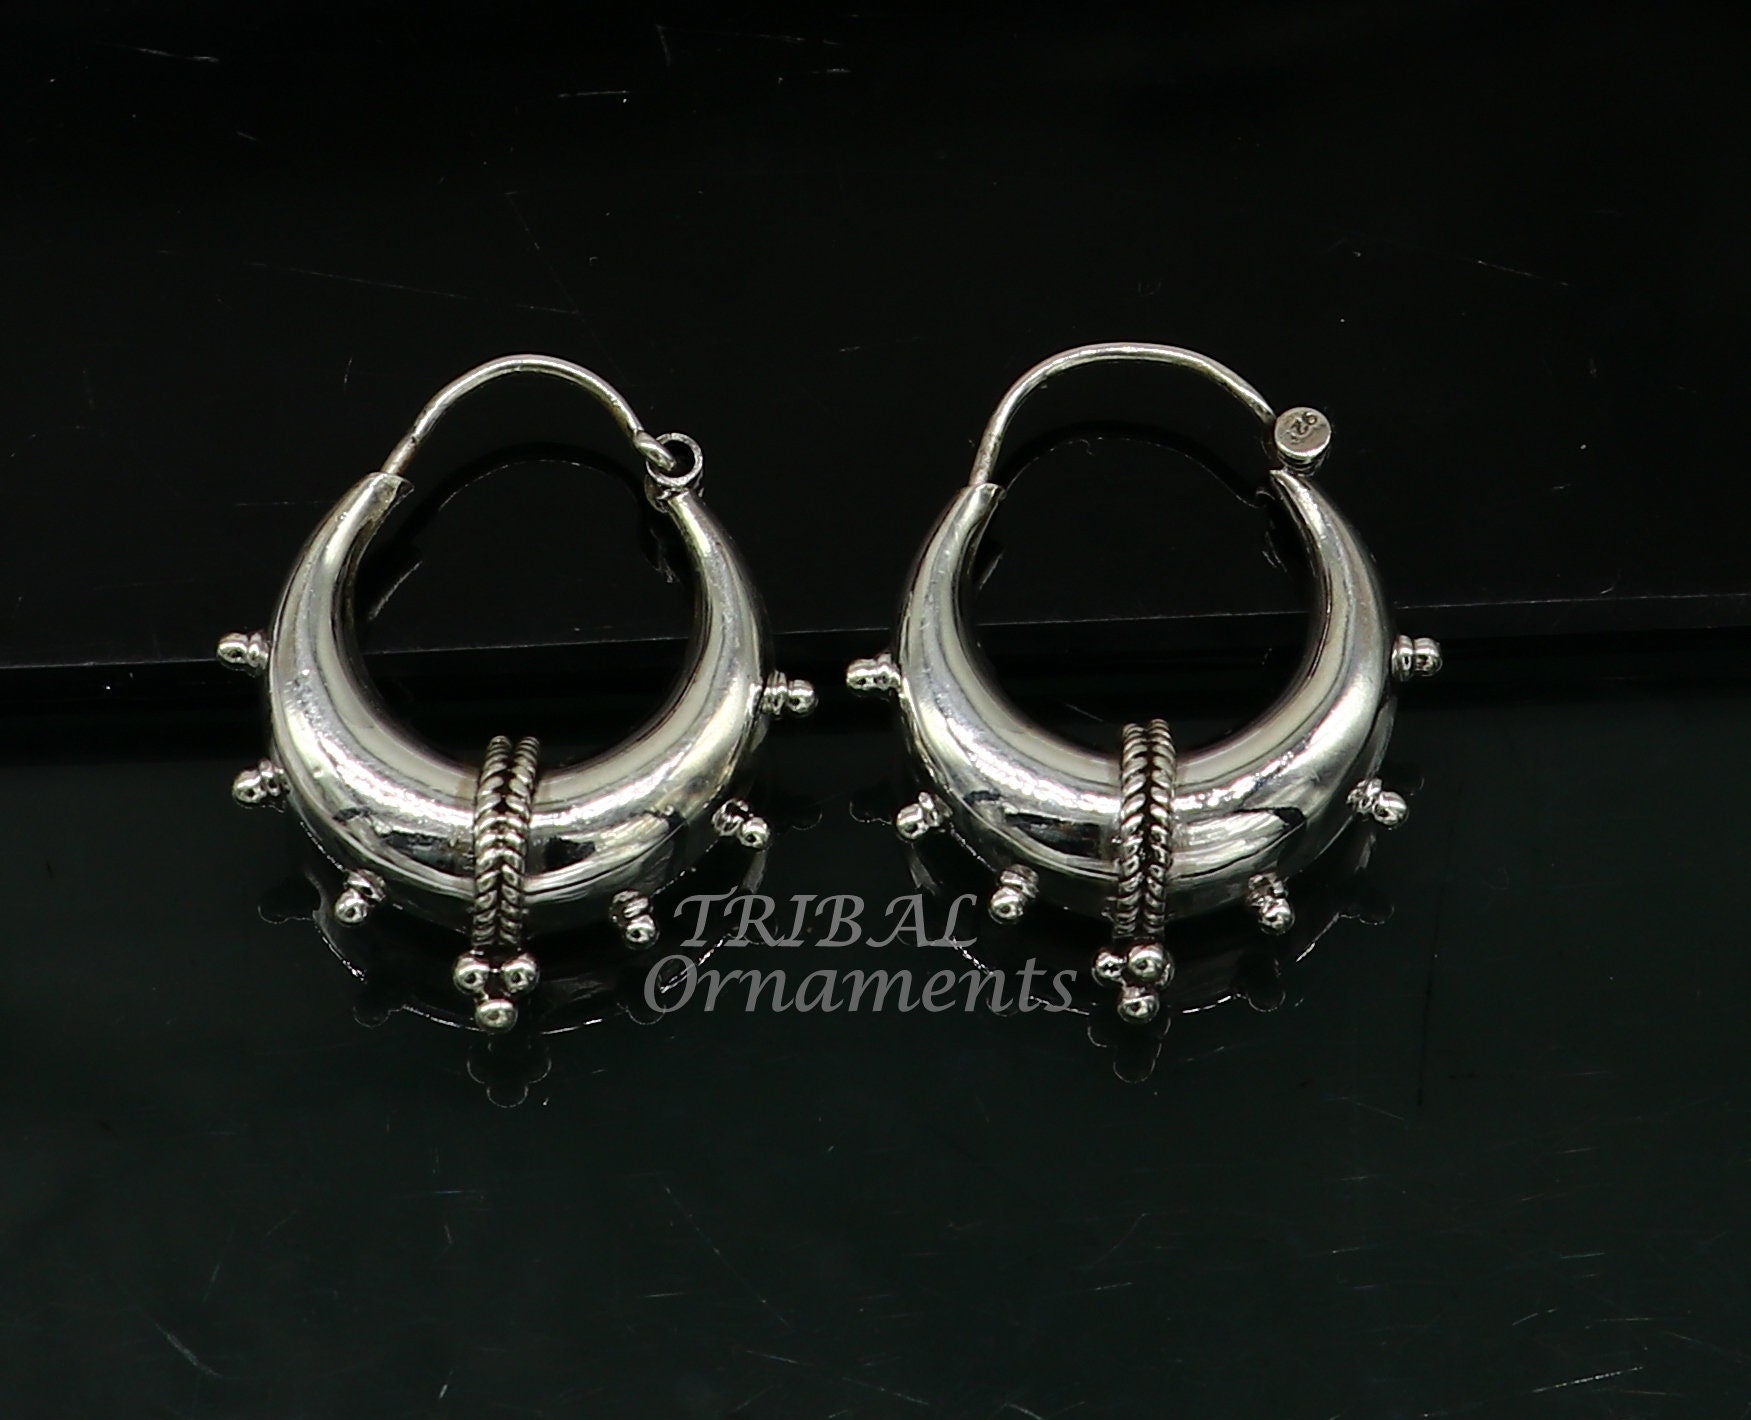 Vintage style 925 sterling silver handmade unique traditional cultural ethnic hoops earring bali for men's/girl's best dancing jewelry s1125 - TRIBAL ORNAMENTS